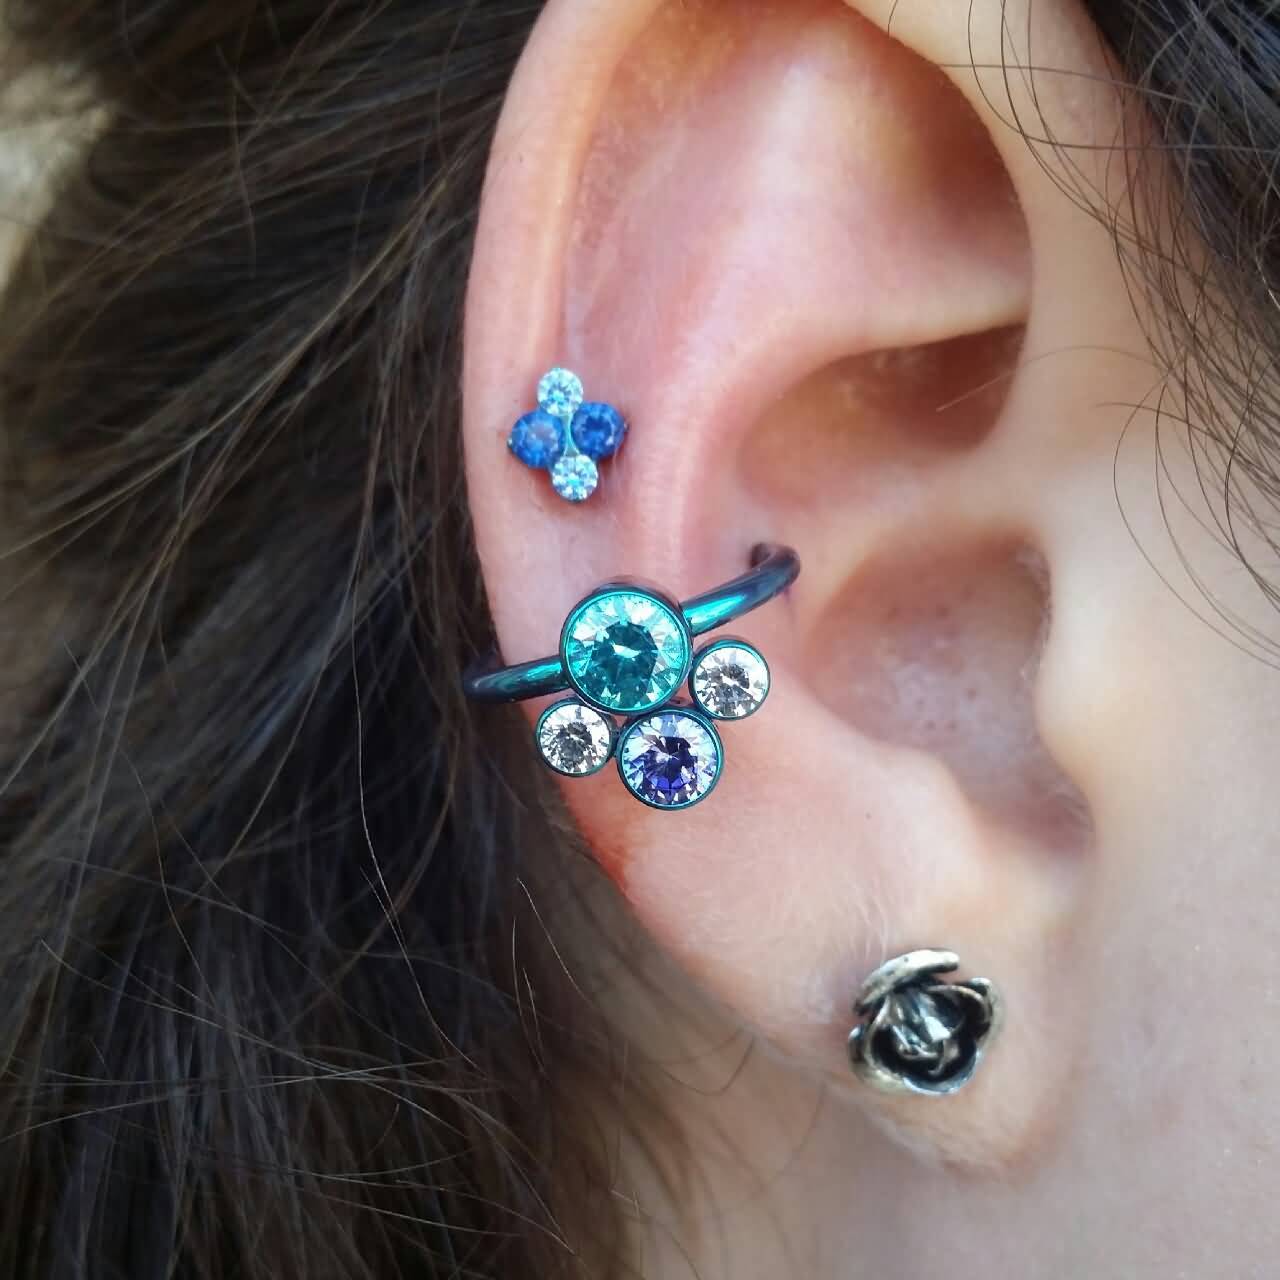 Awesome Outer Conch Piercing